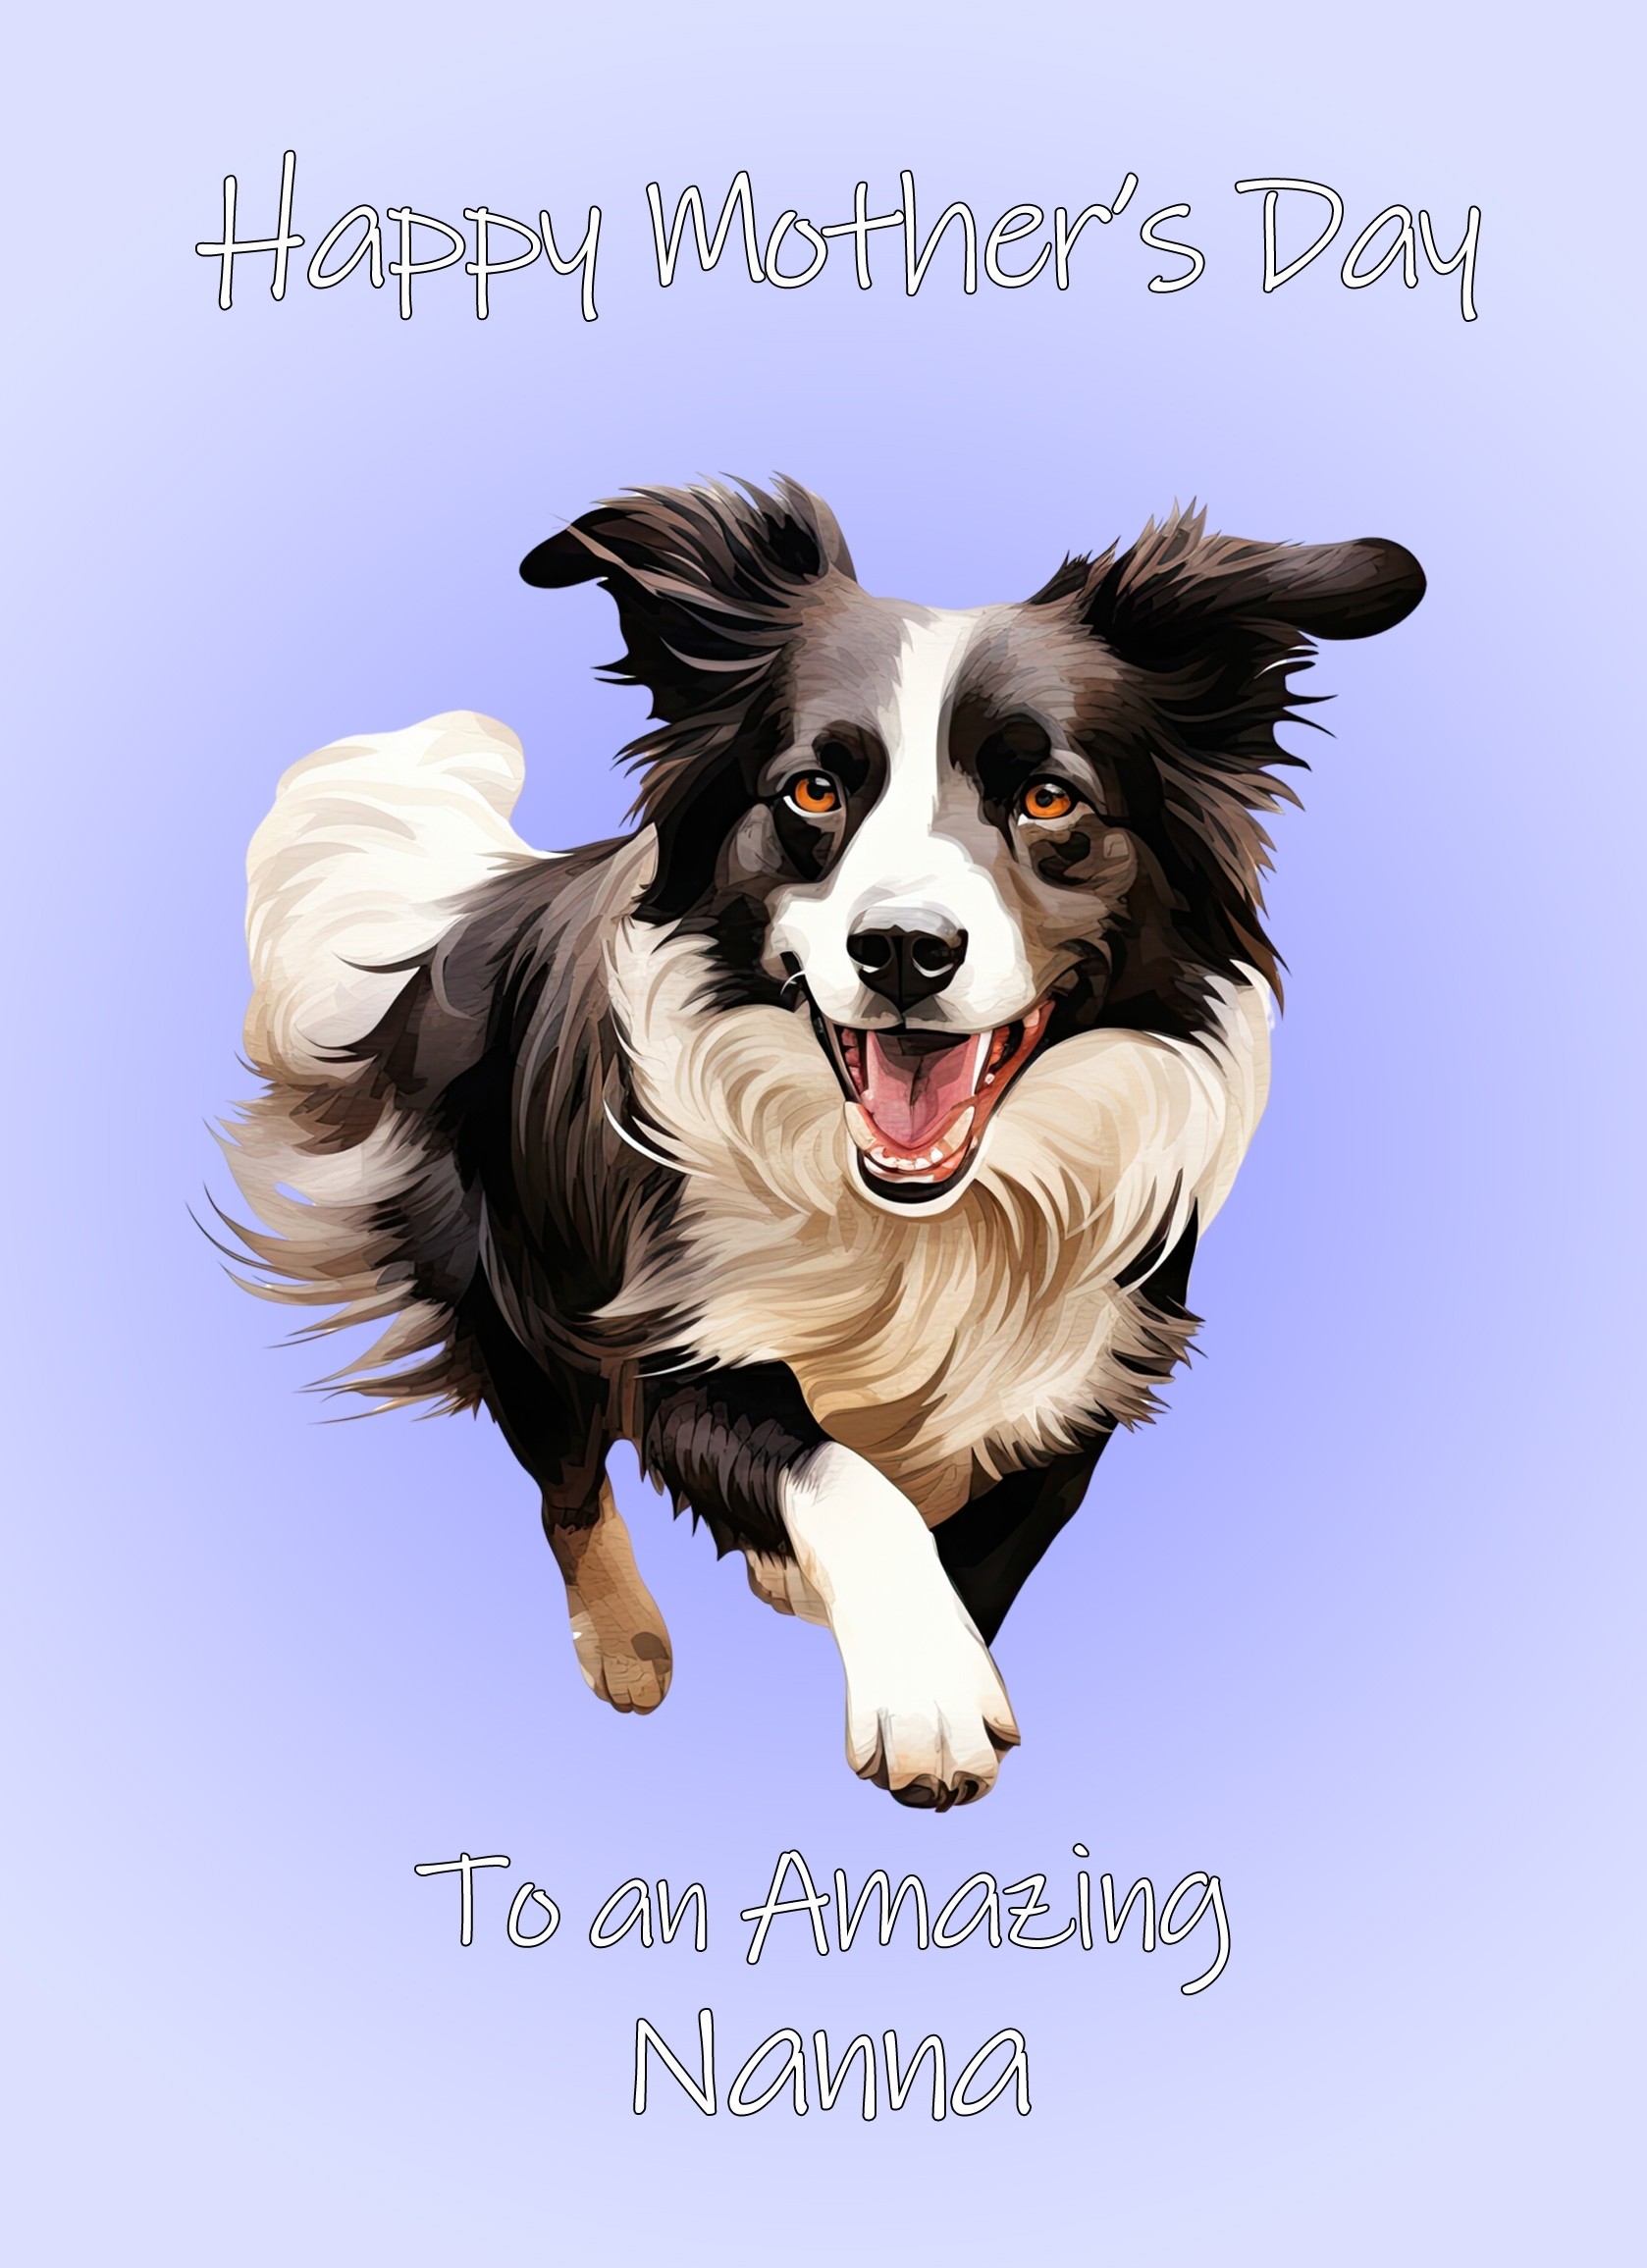 Border Collie Dog Mothers Day Card For Nanna